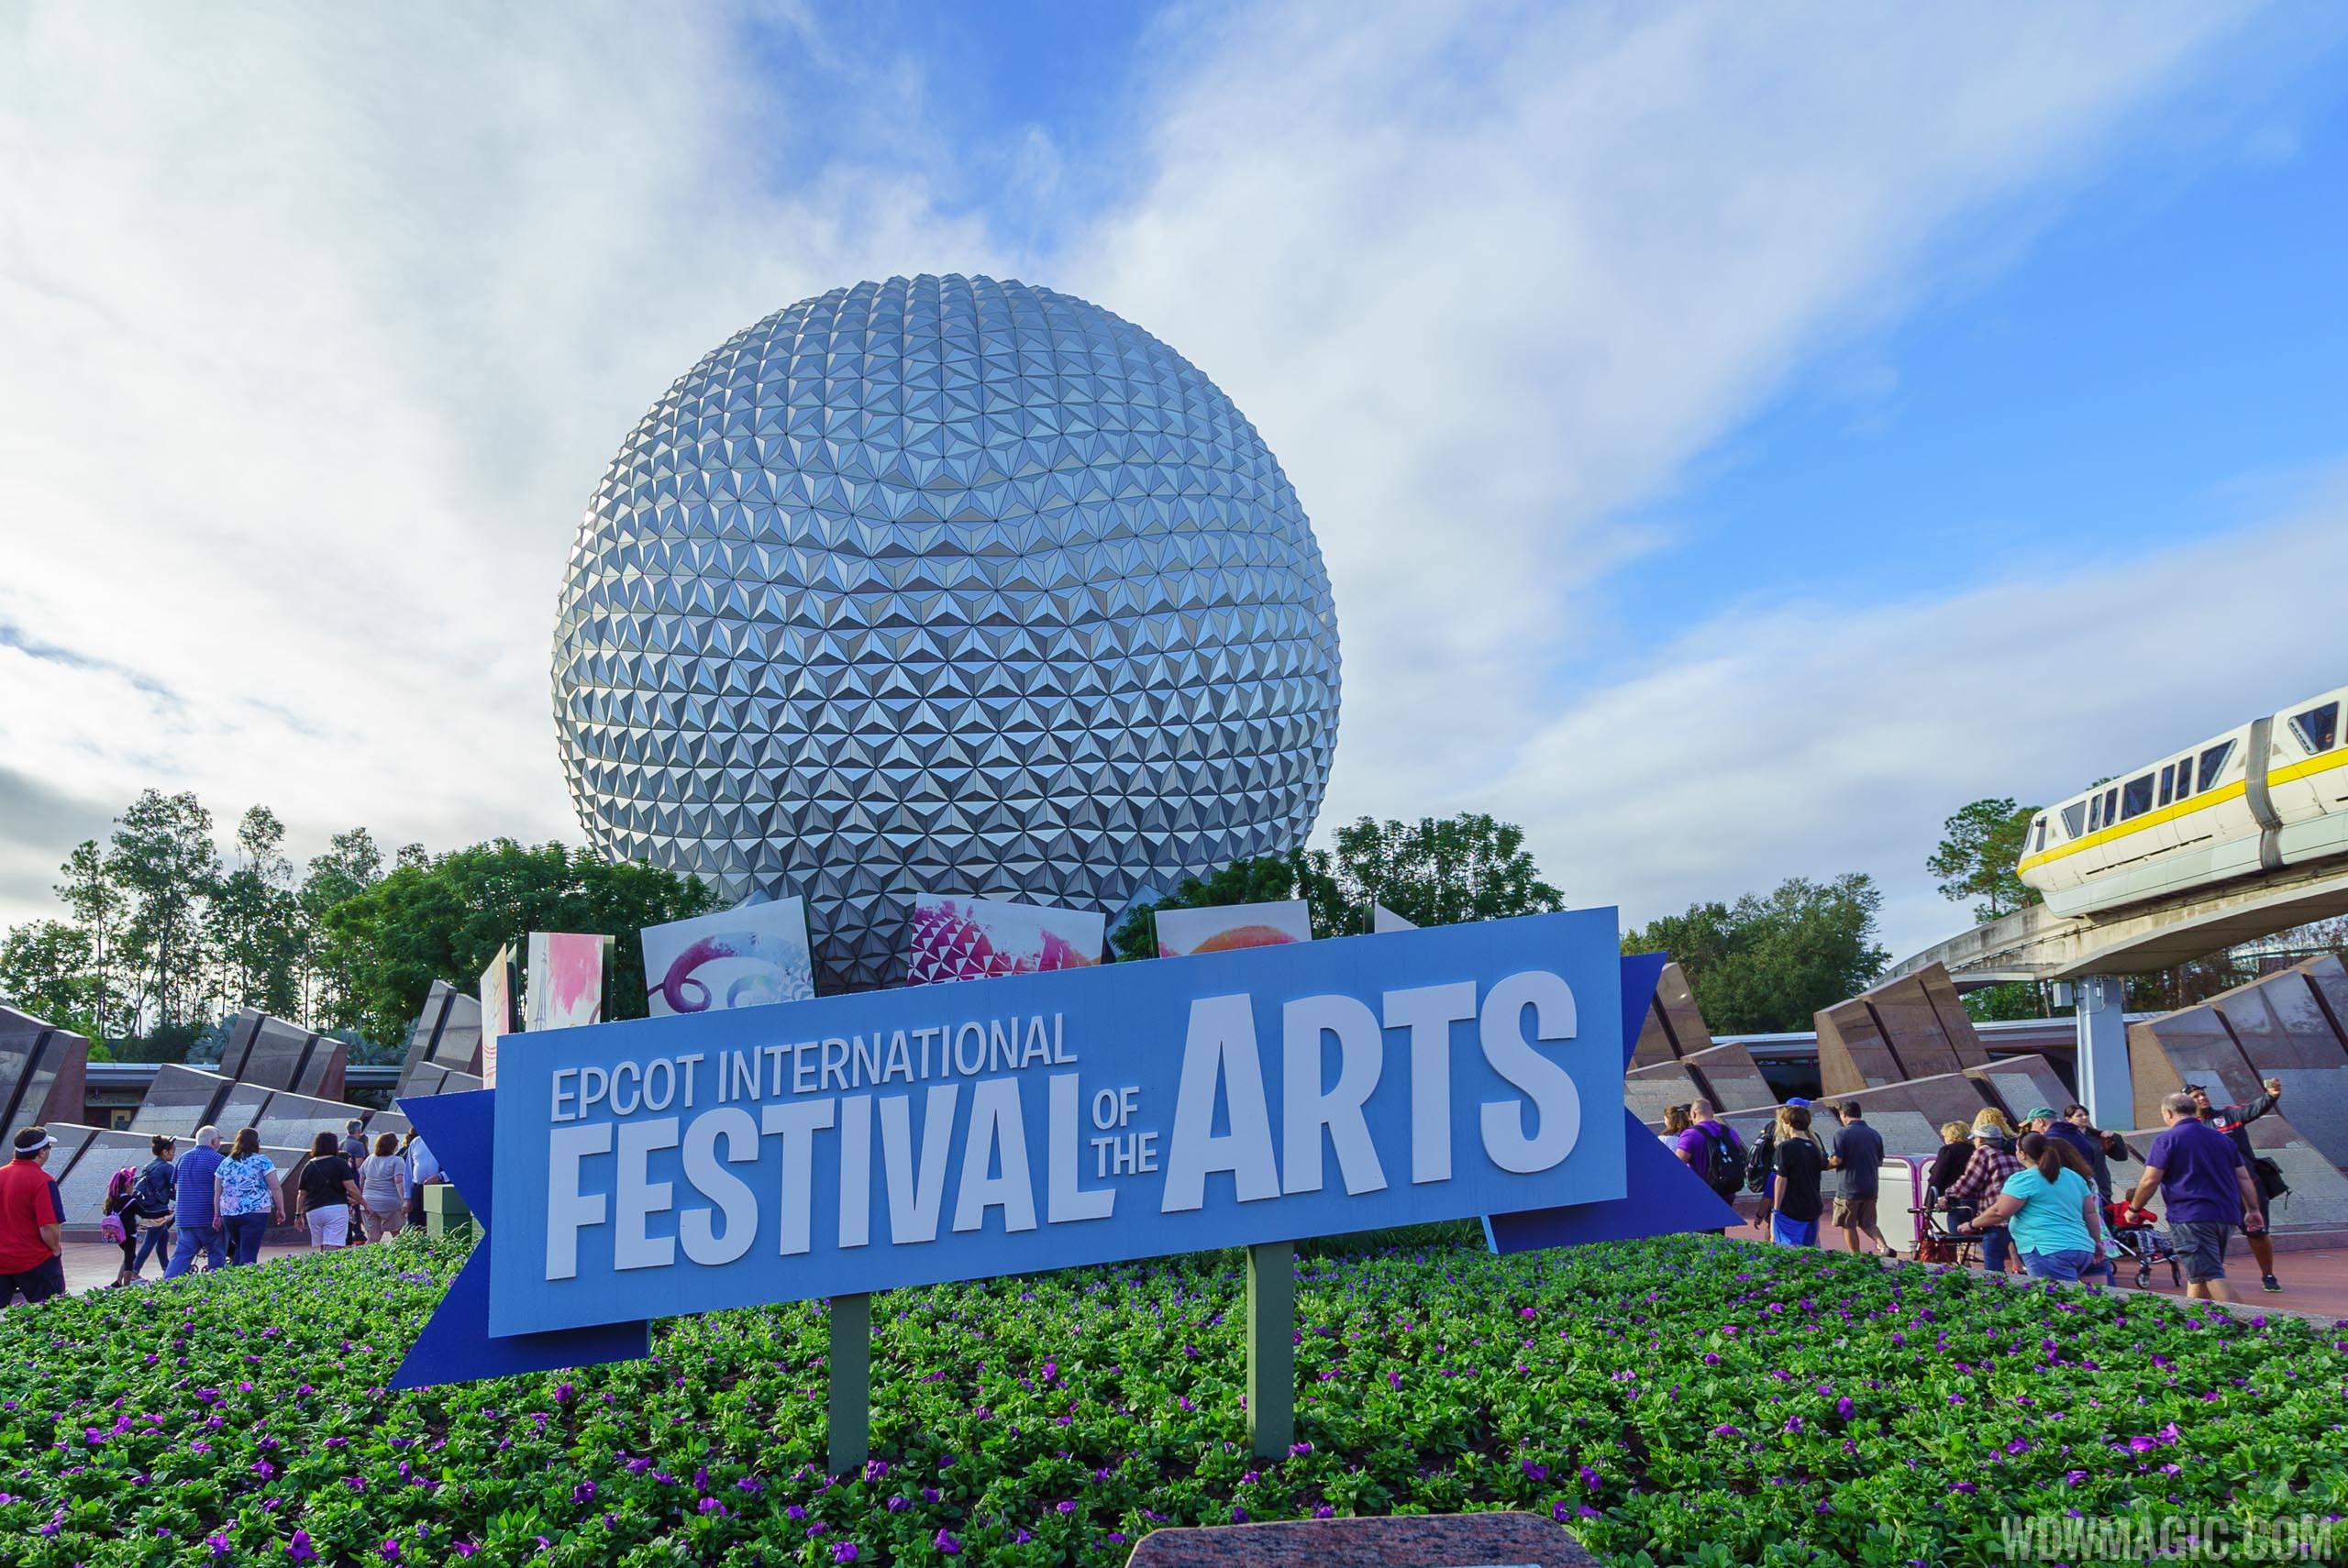 Bookings now open for premium experiences at the Epcot International Festival of the Arts